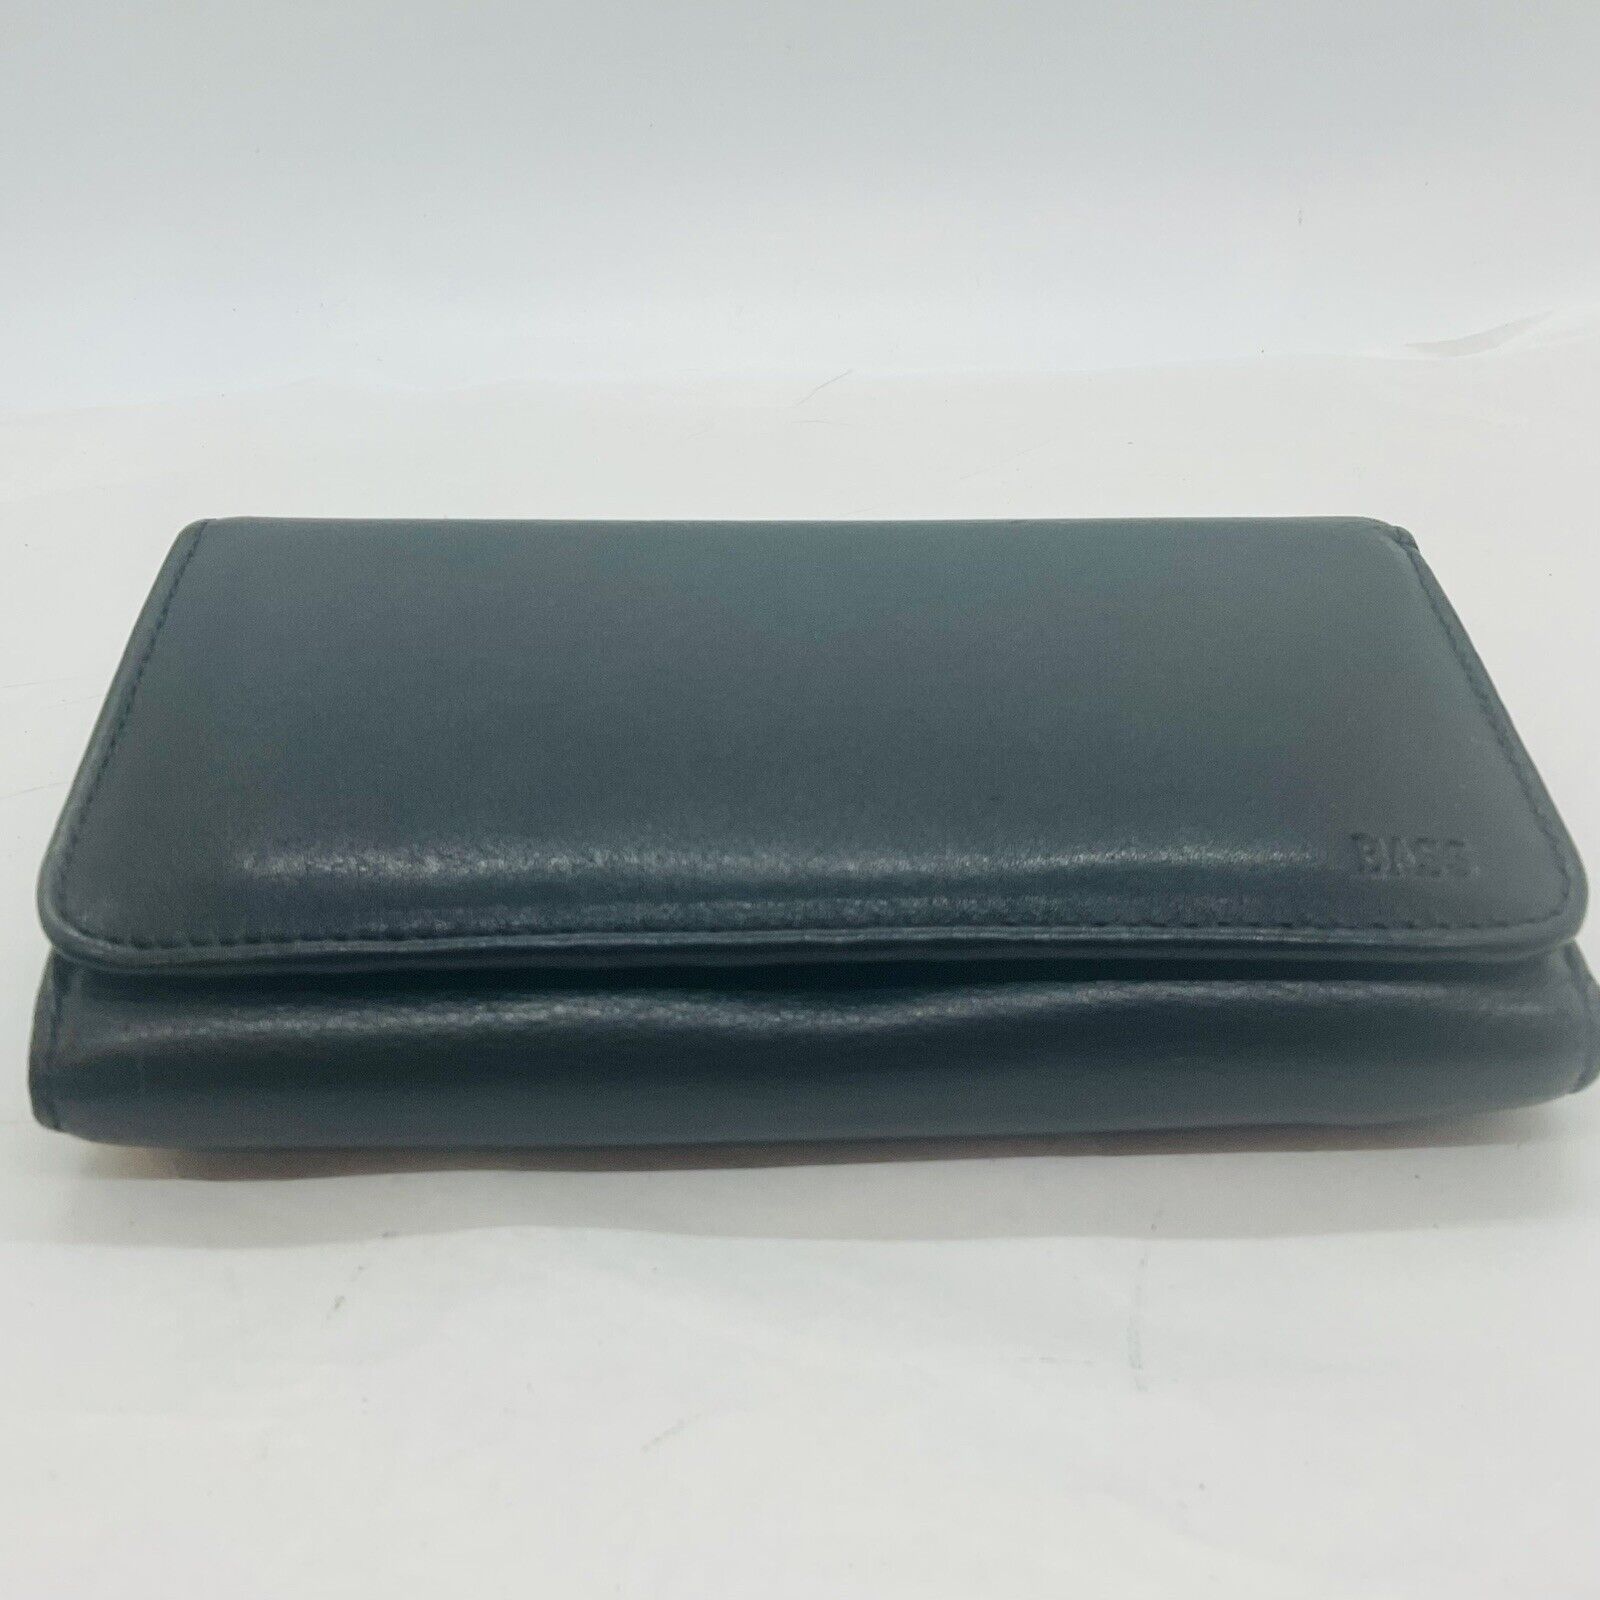 Black Bass Genuine Leather Trifold Women’s Wallet 6”x3 1/2” Closed 9 1/2” Open